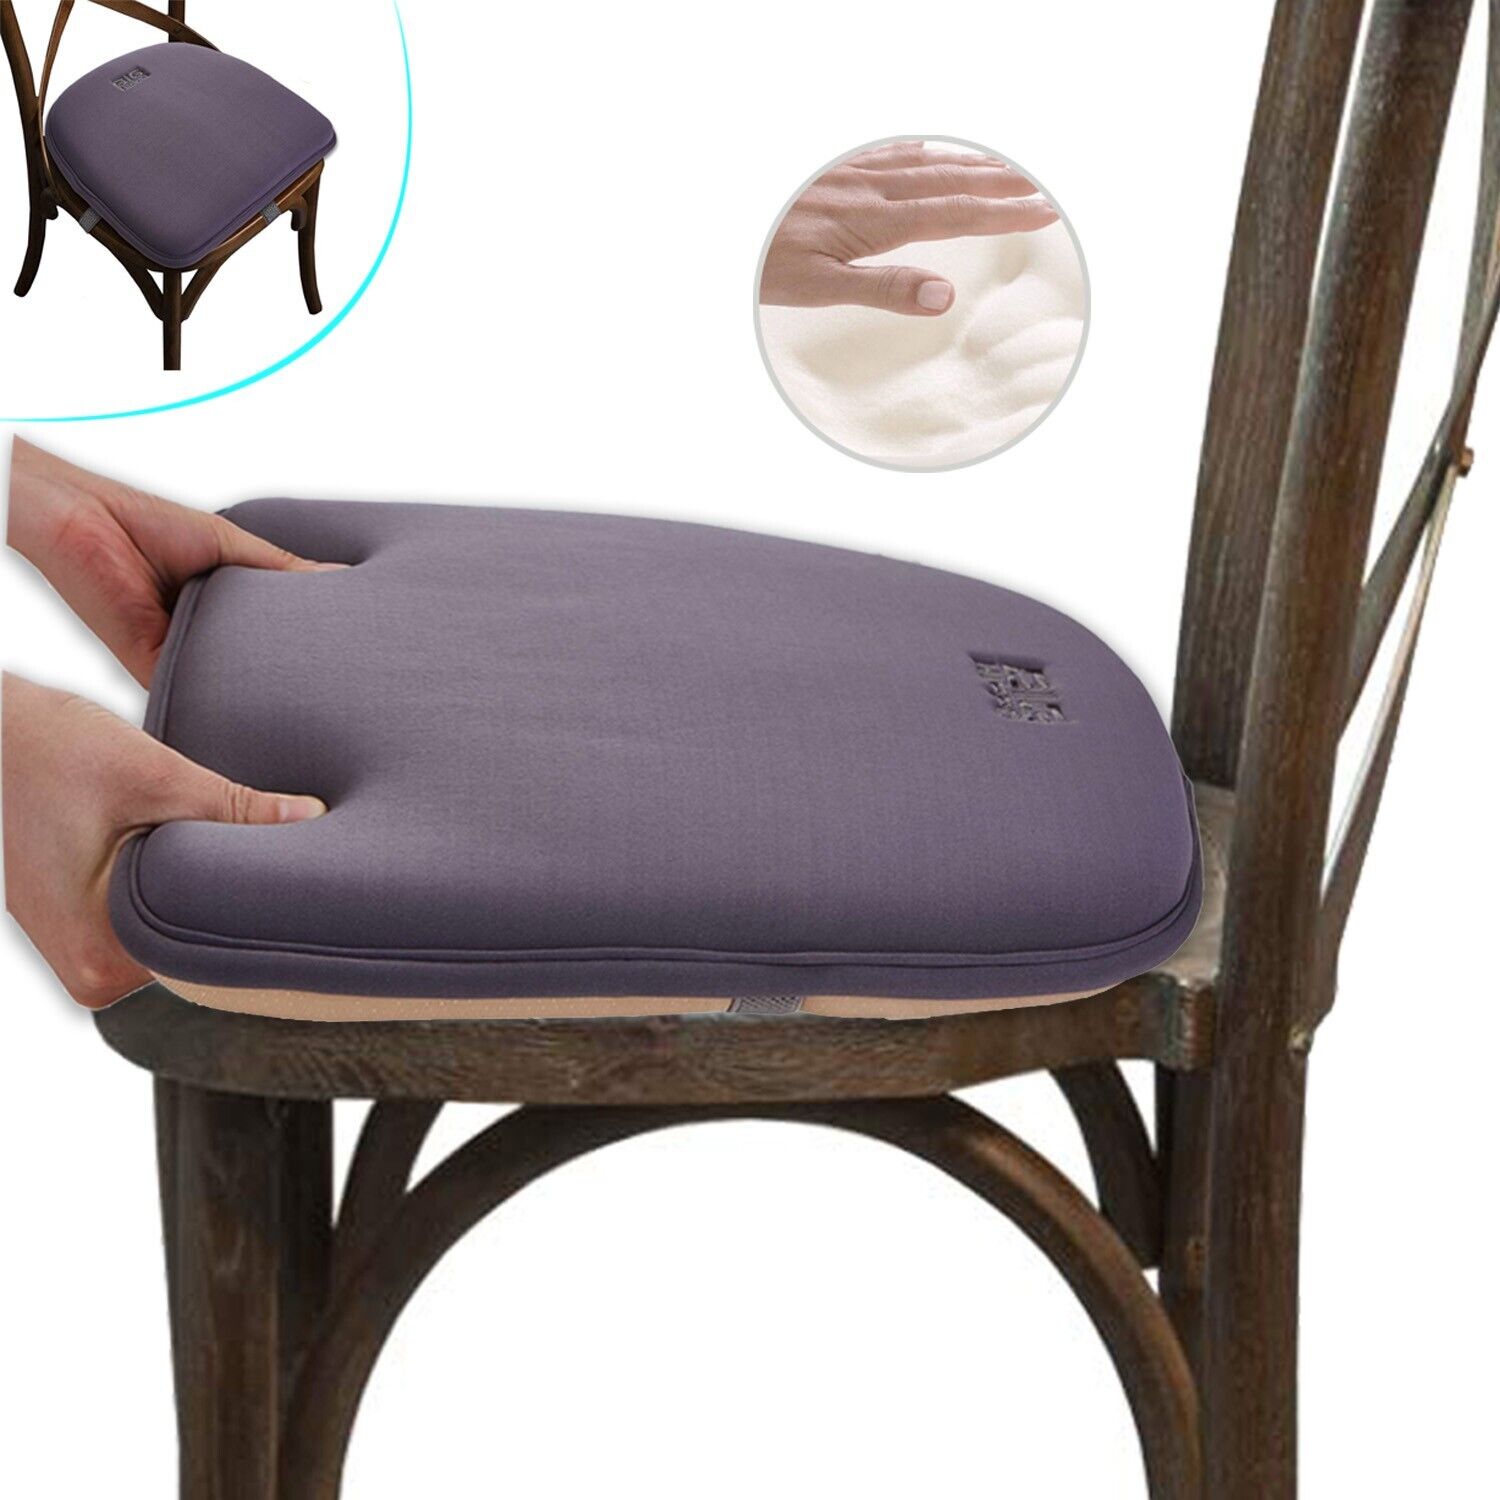 Kitchen Chair Cushion Memory Foam Seat Cushion Pad for Dining Kitchen Chairs